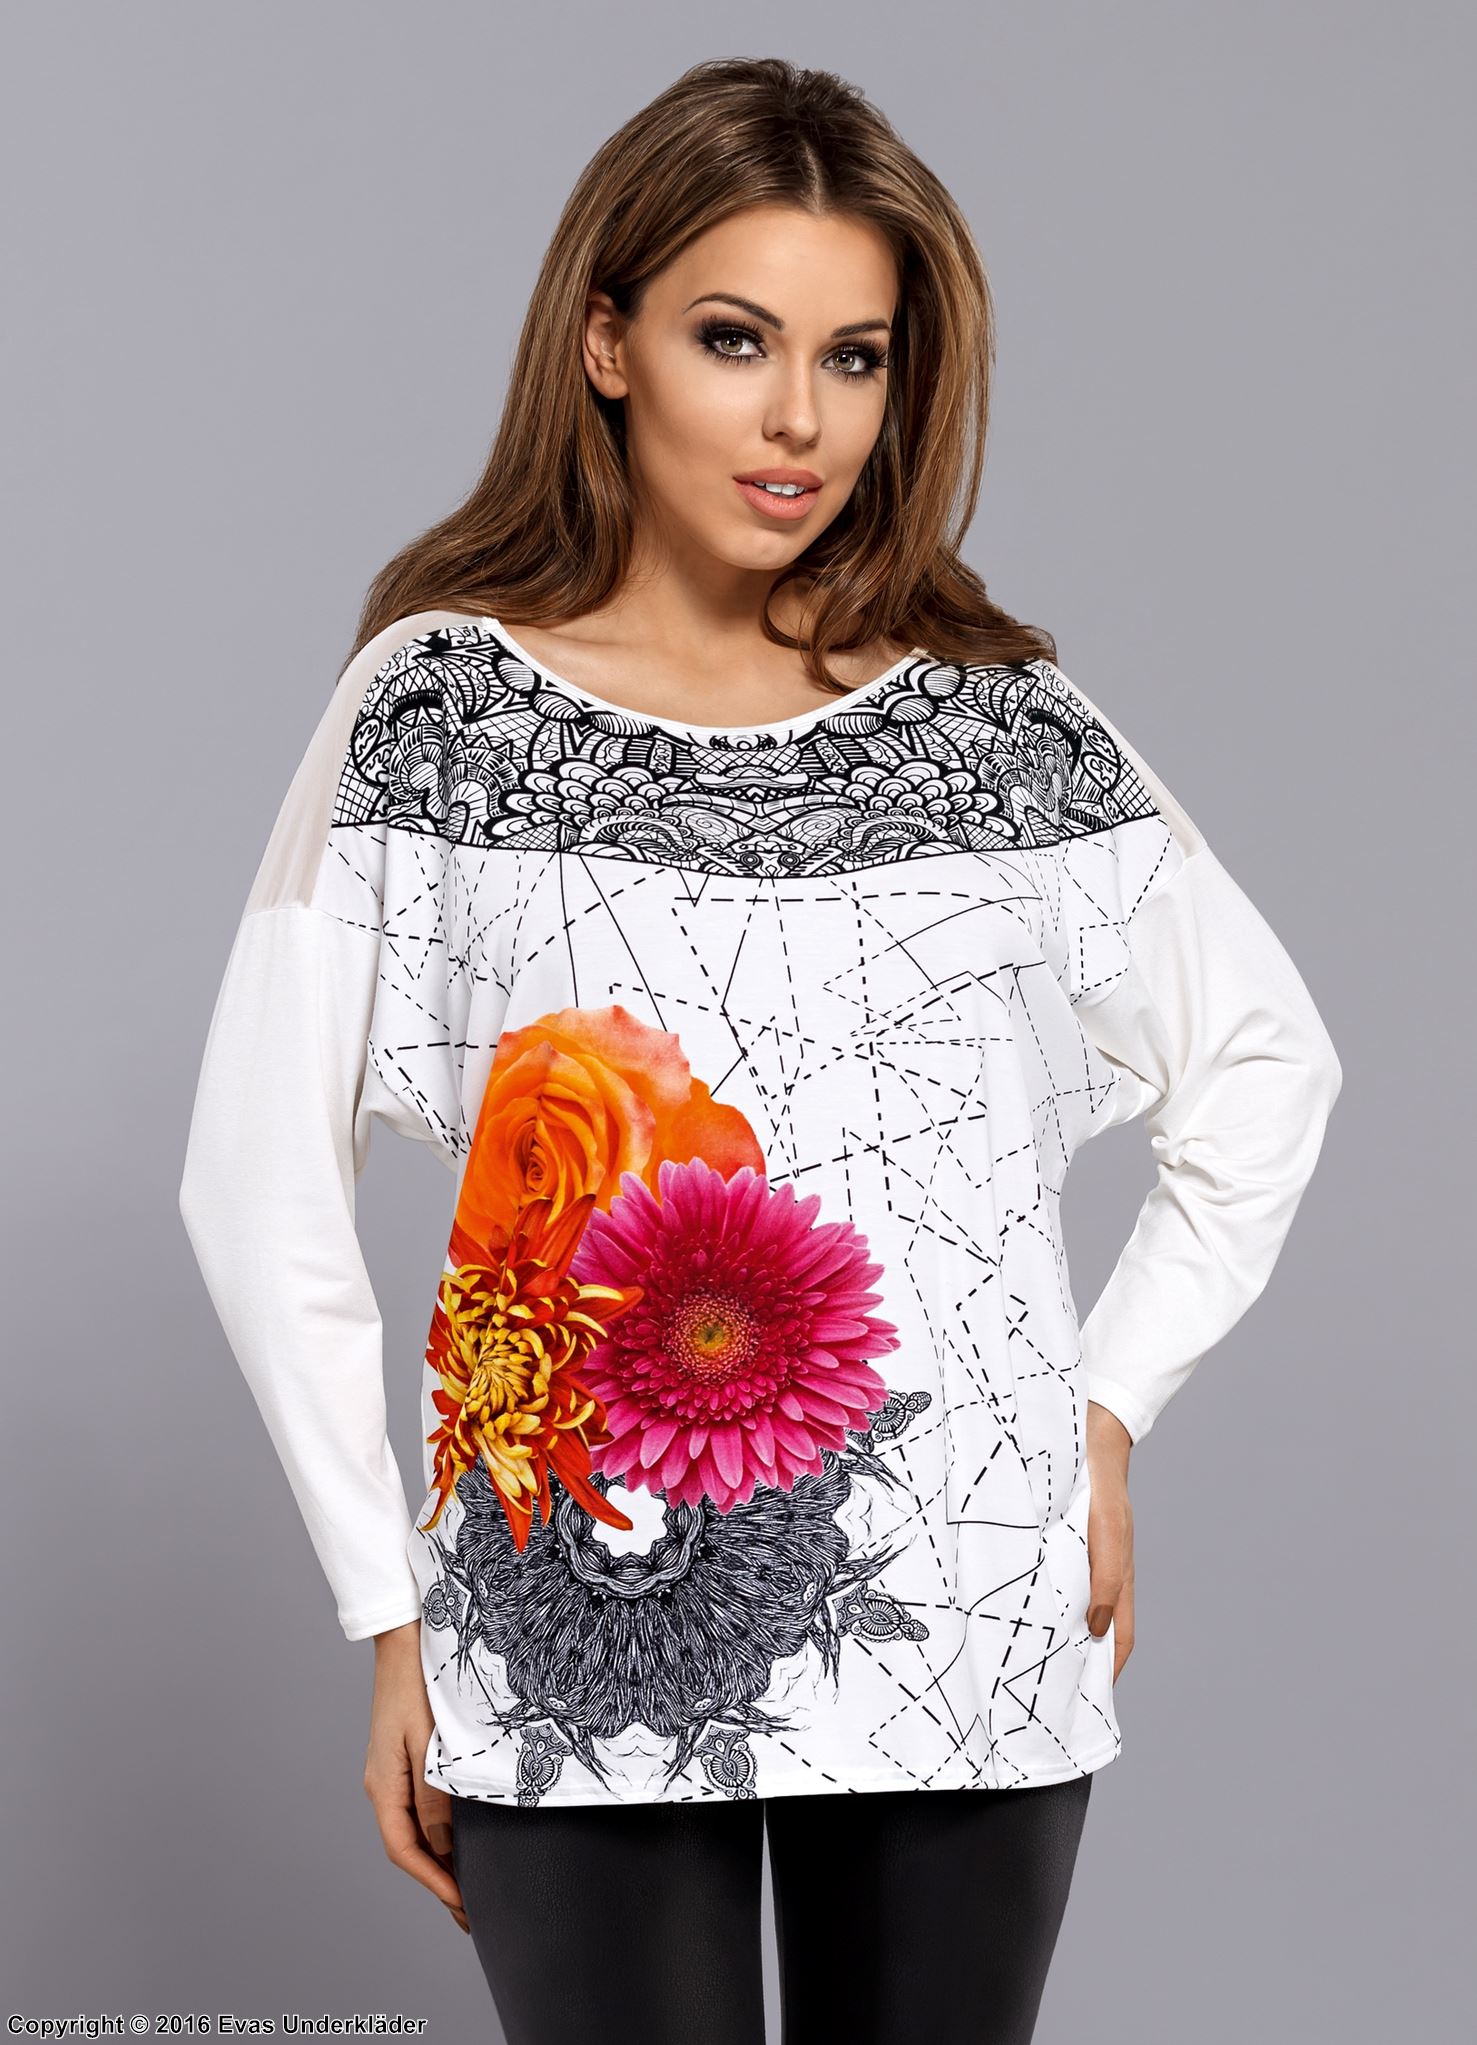 Long sleeve top, high quality viscose, mesh inlay, colorful flowers